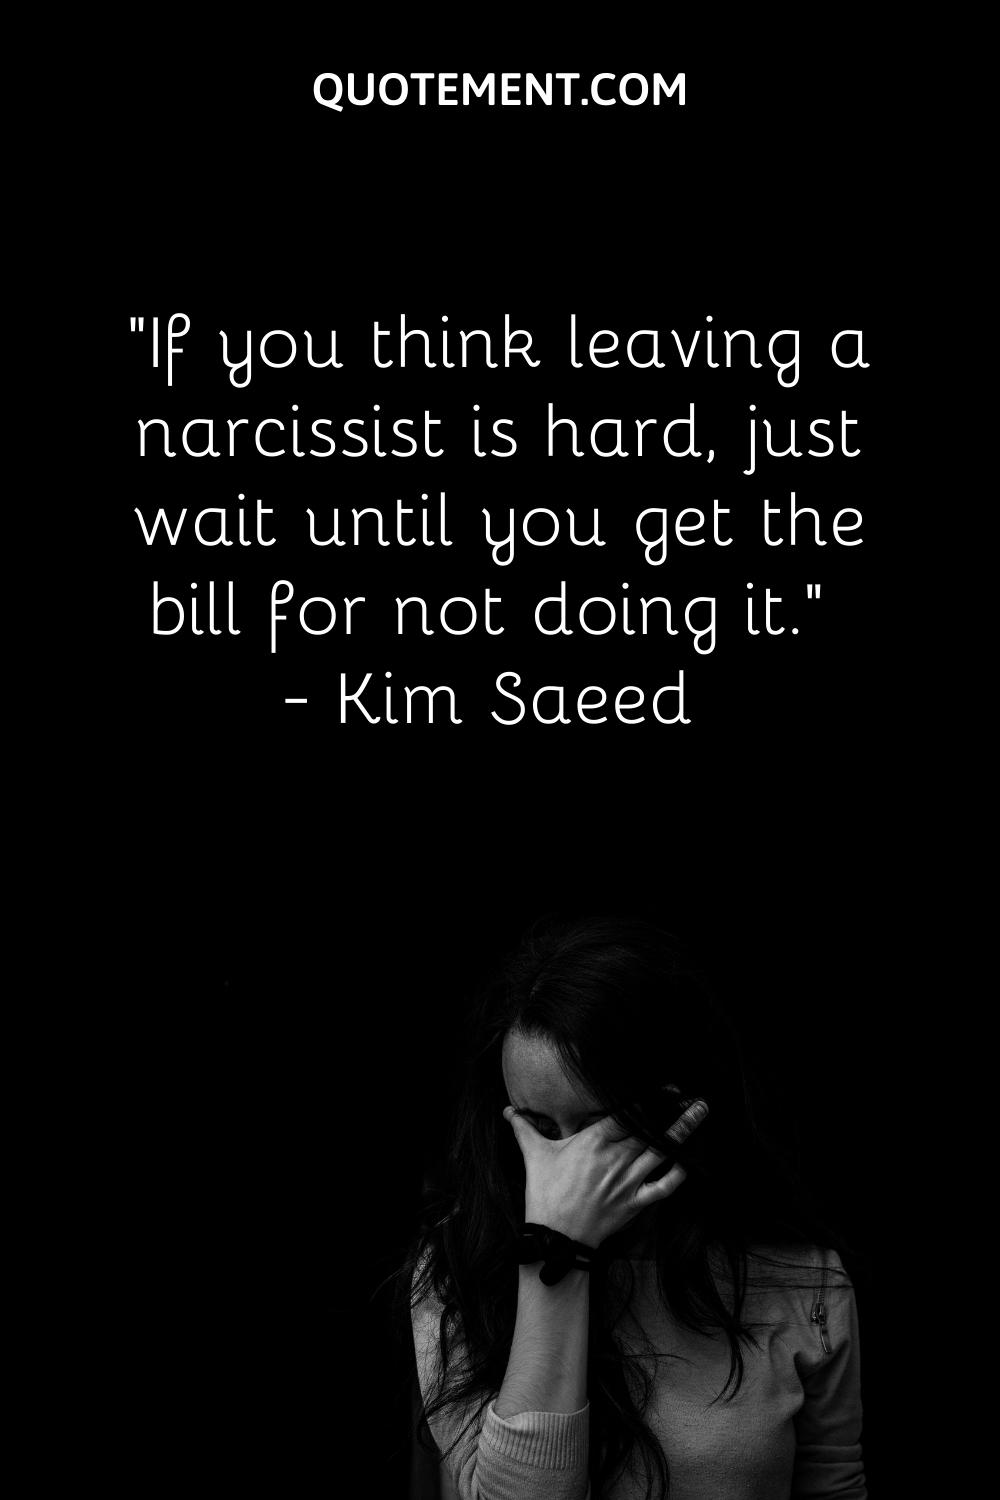 If you think leaving a narcissist is hard, just wait until you get the bill for not doing it.